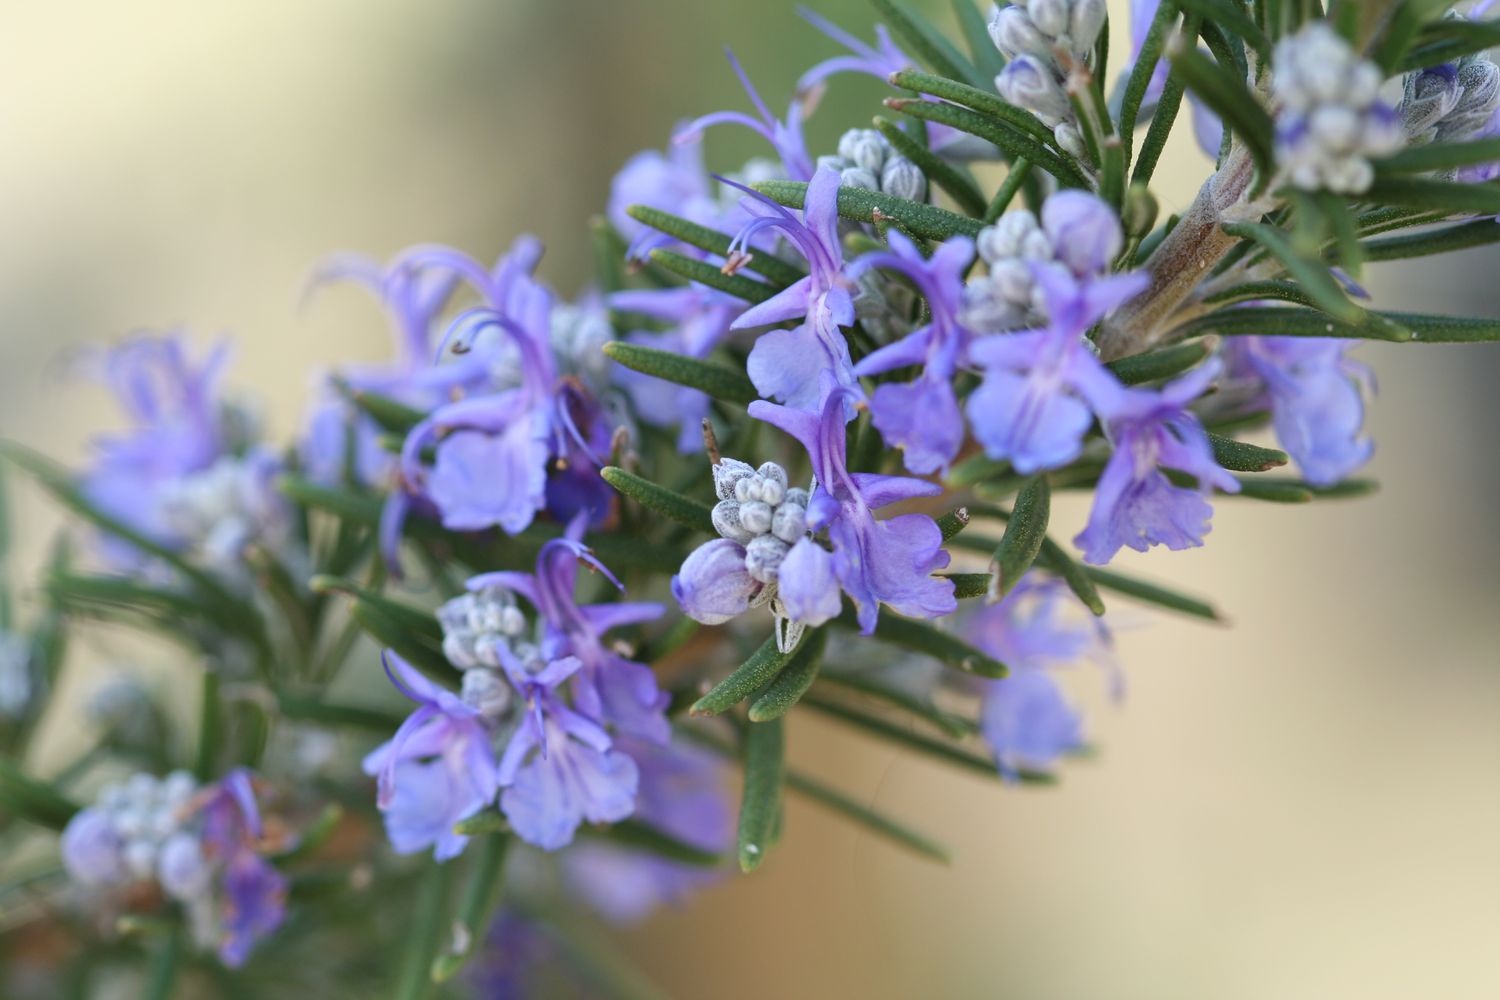 Close up of rosemary plant and flowers